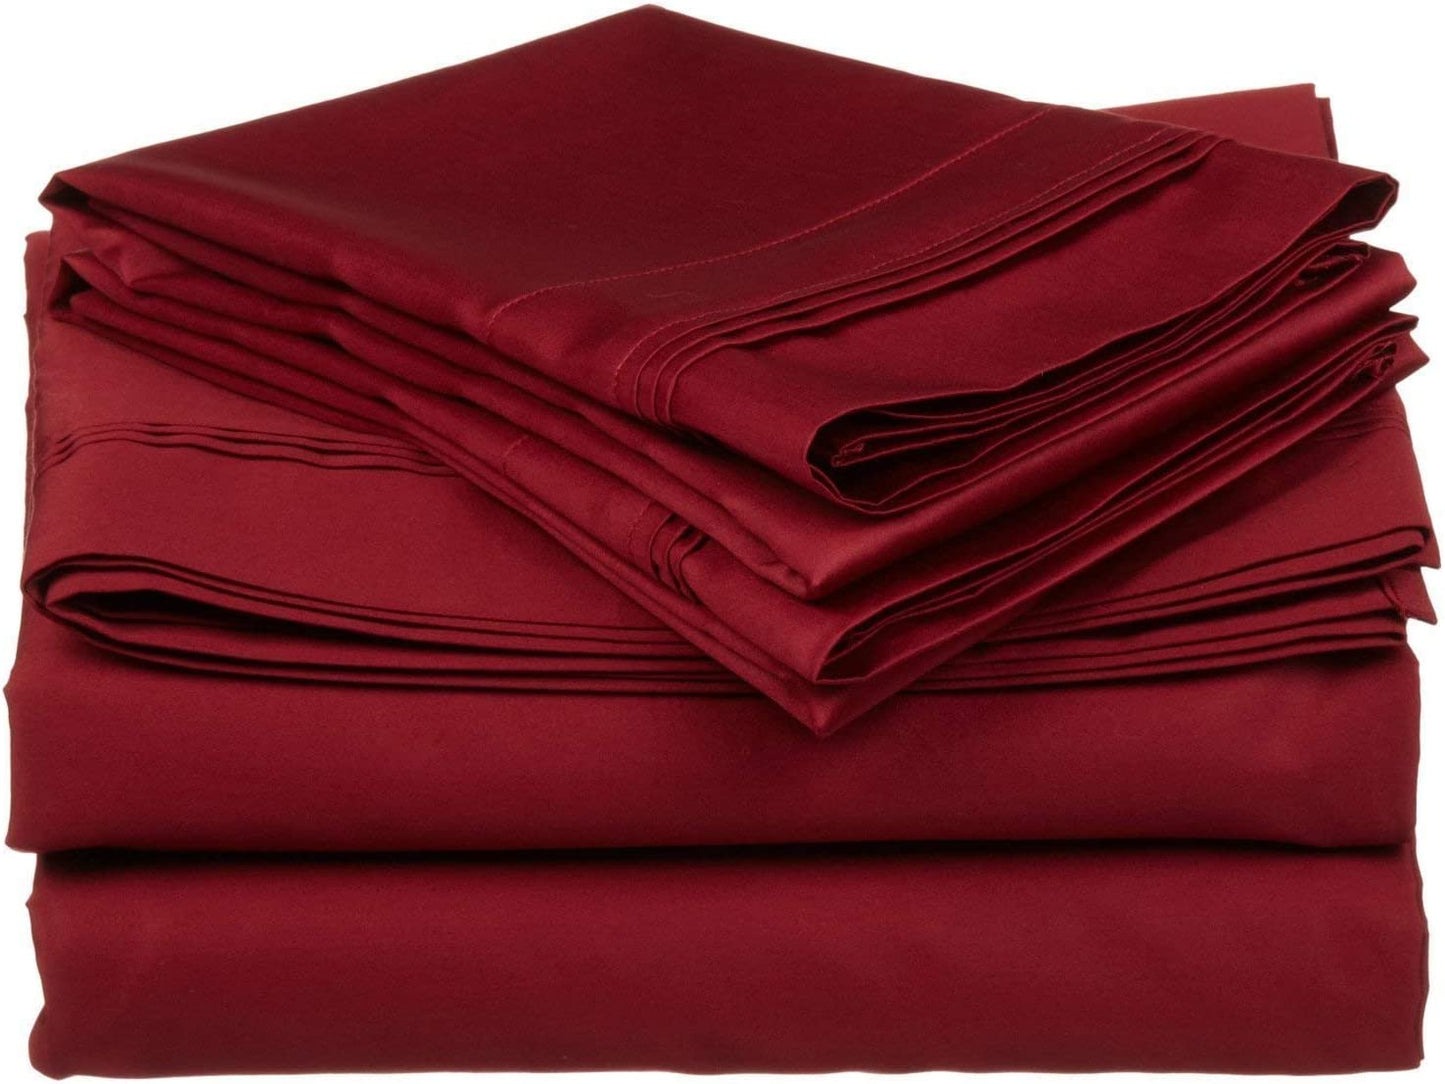 16 Inch Pocket Burgundy Fitted Sheet 1000TC Egyptian Cotton at-EgyptianHomeLinens.com